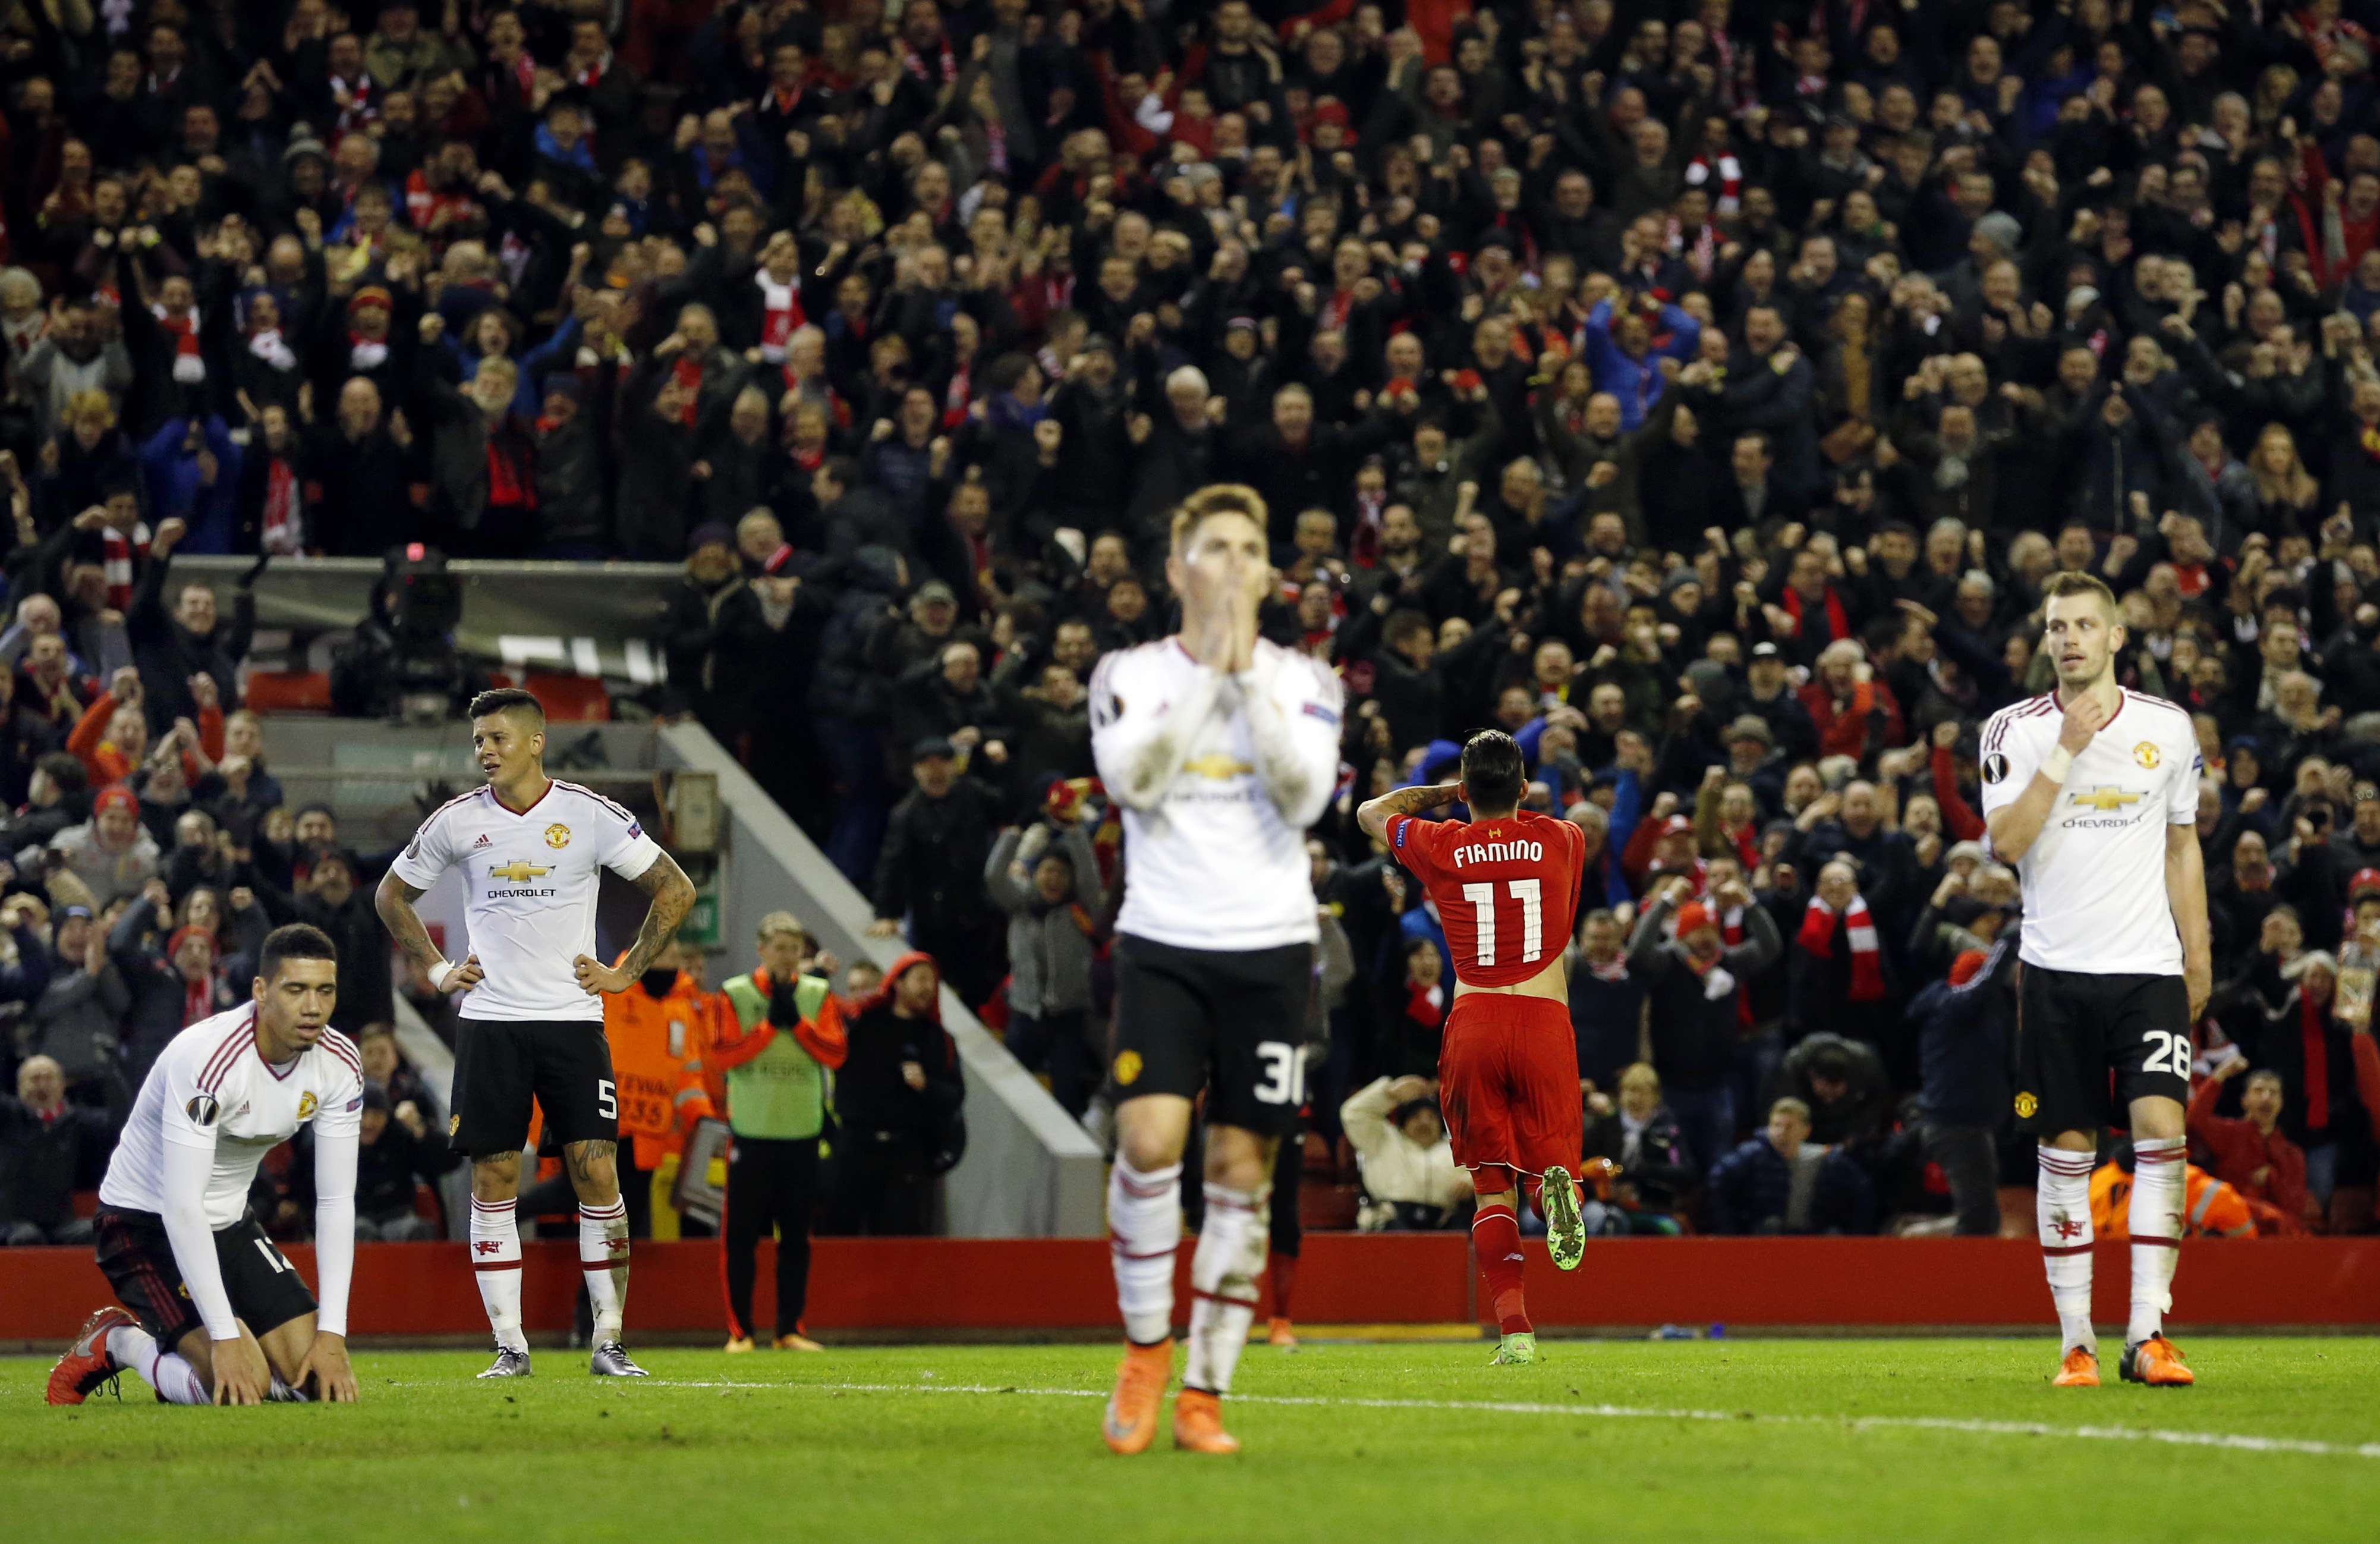 Despondent Manchester United players react as Roberto Firmino puts Liverpool 2-0 in front at Anfield. Photo: Reuters